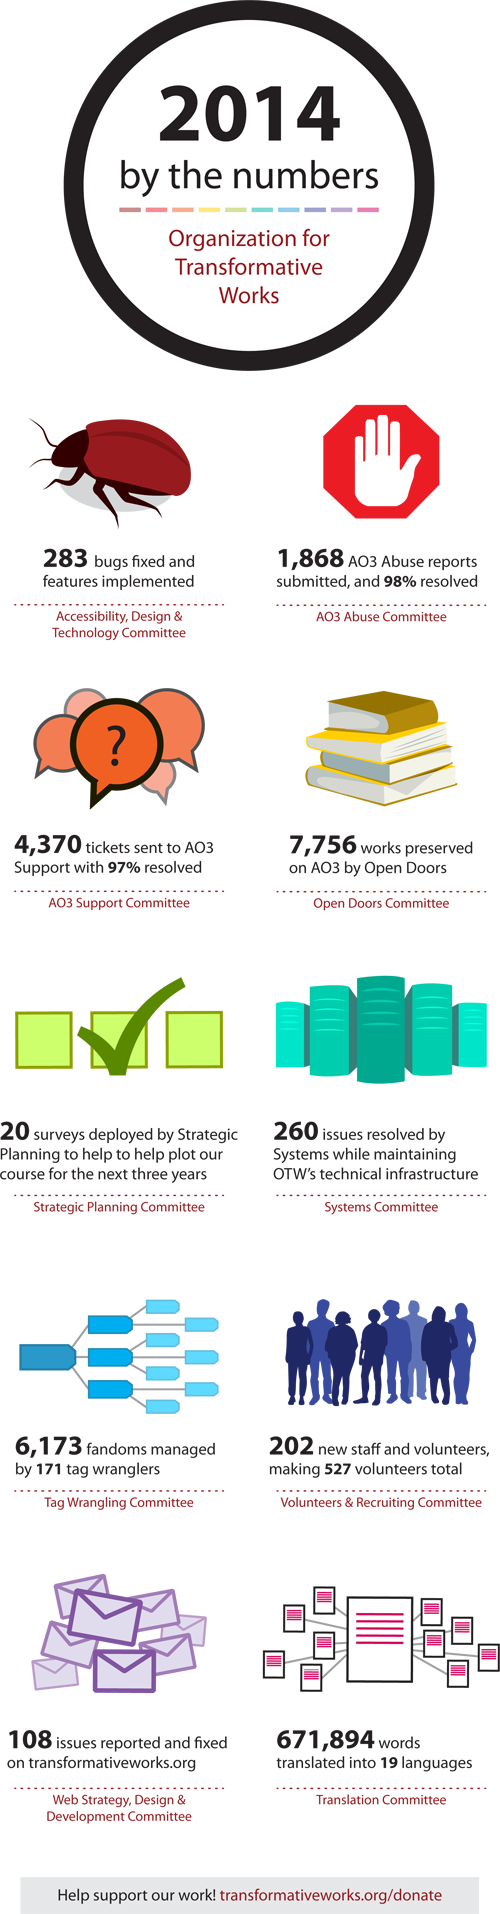 2014 By the Numbers: 283 bugs fixed and features implemented at AO3, 1,868 AO3 Abuse reports submitted, and 98% resolved, 4,370 tickets sent to AO3 Support with 97% resolved, 7,756 works preserved on AO3 by Open Doors, 20 surveys deployed by Strategic Planning to help plot our course for the next 3 years, 260 issues resolved by Systems while maintaining OTW's infrastructure, 16,173 fandoms managed by 171 tag wranglers, 202 new staff and volunteers added making 527 volunteers total, 108 issues reported and fixed on transformativeworks.org, 671,894 words translated by our translation volunteers into 19 languages